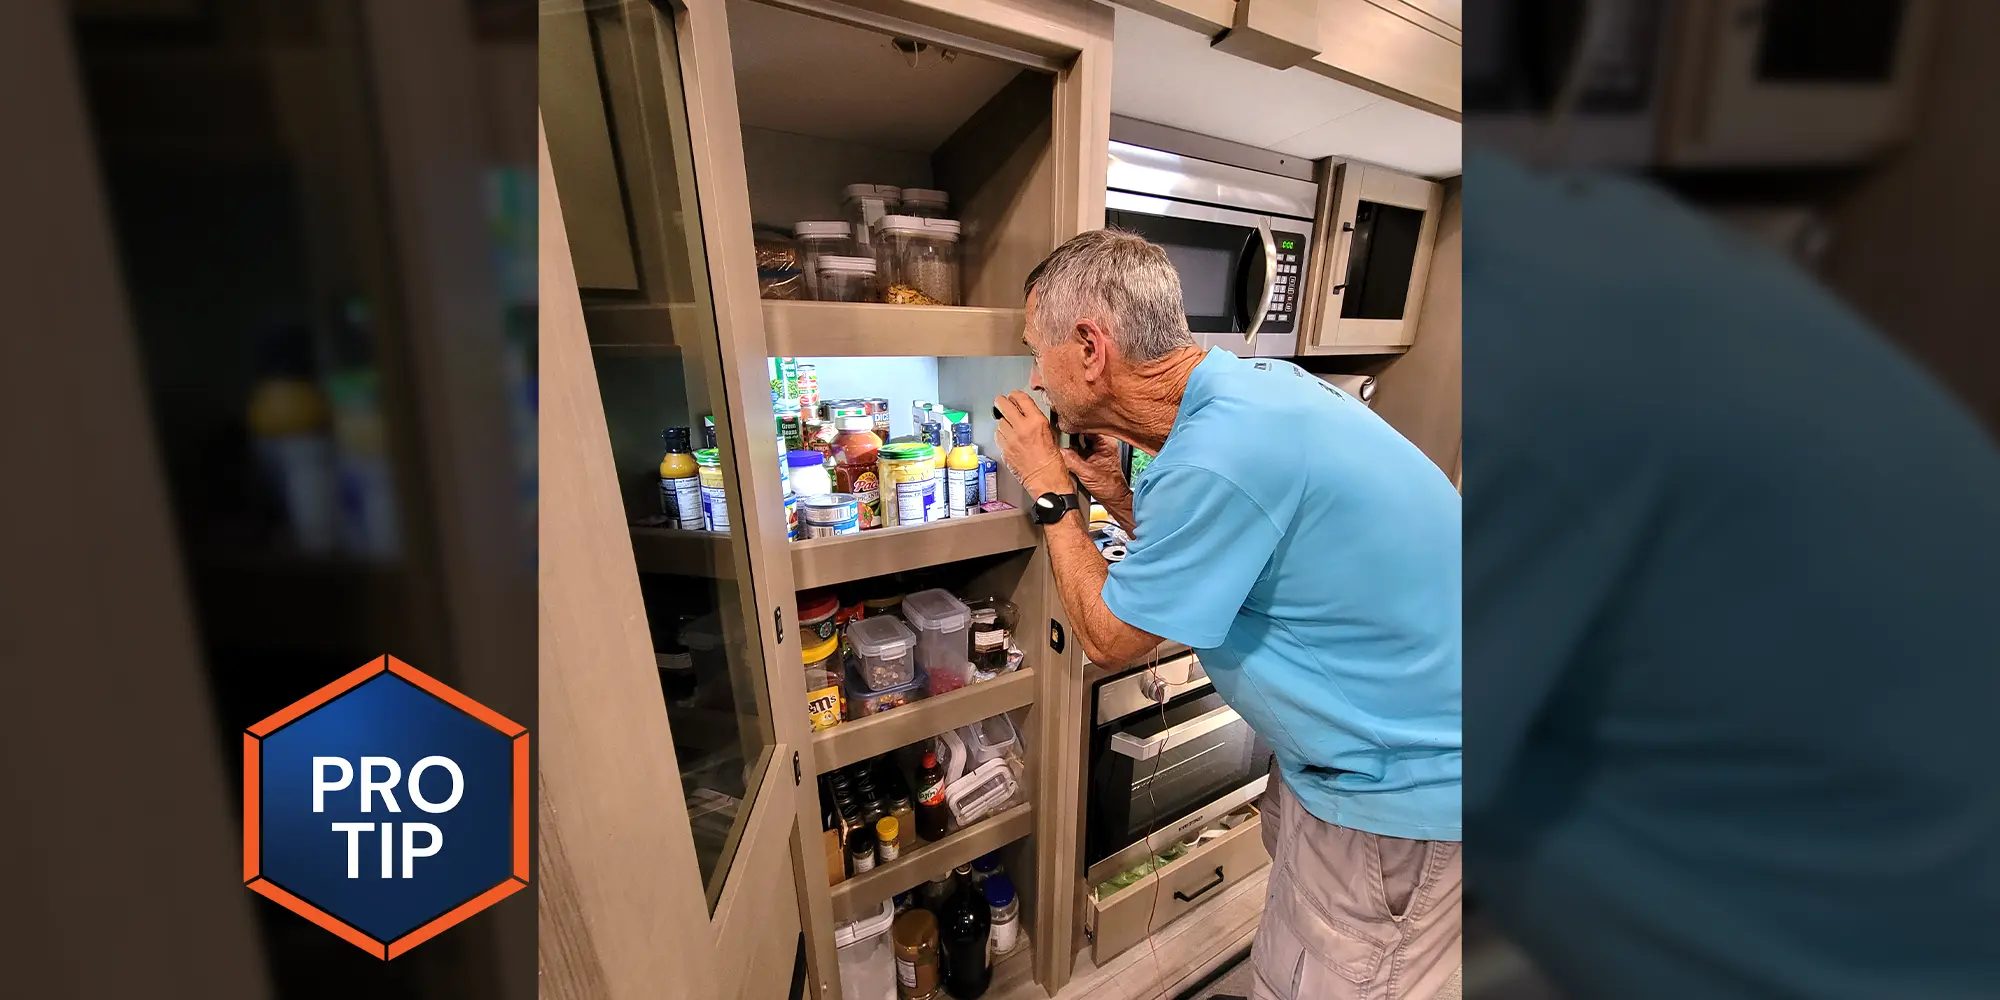 a man uses a small flashlight to search one of five packed shelves in an RV pantry